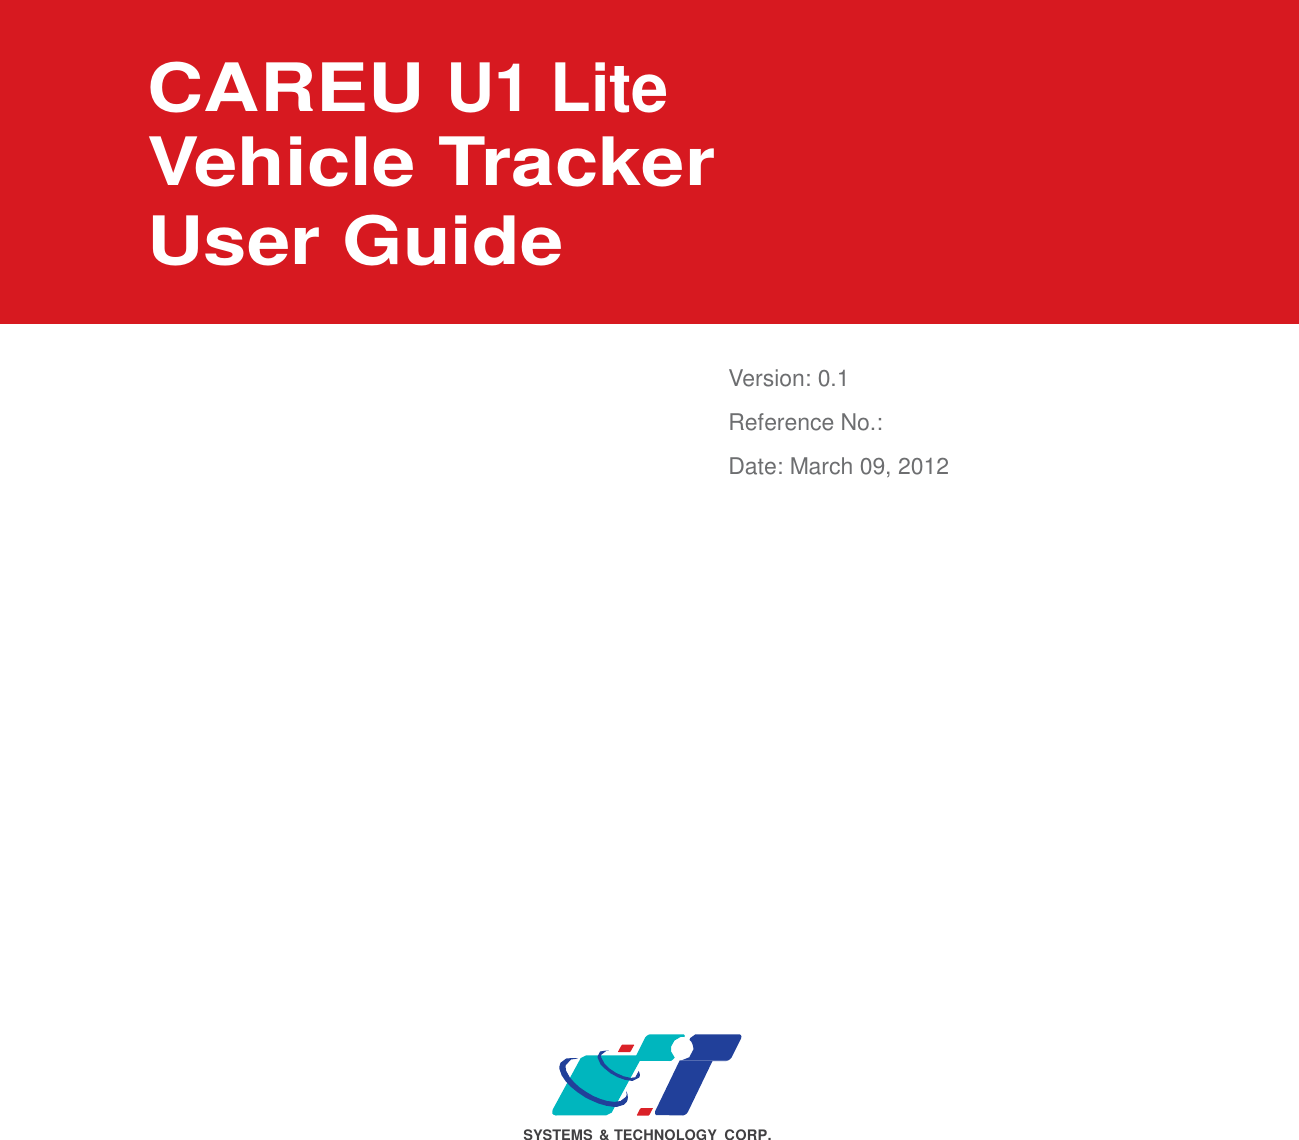                        CAREU U1 Lite   Vehicle Tracker User Guide     Version: 0.1 Reference No.:  Date: March 09, 2012                                SYSTEMS  &amp; TECHNOLOGY CORP. 